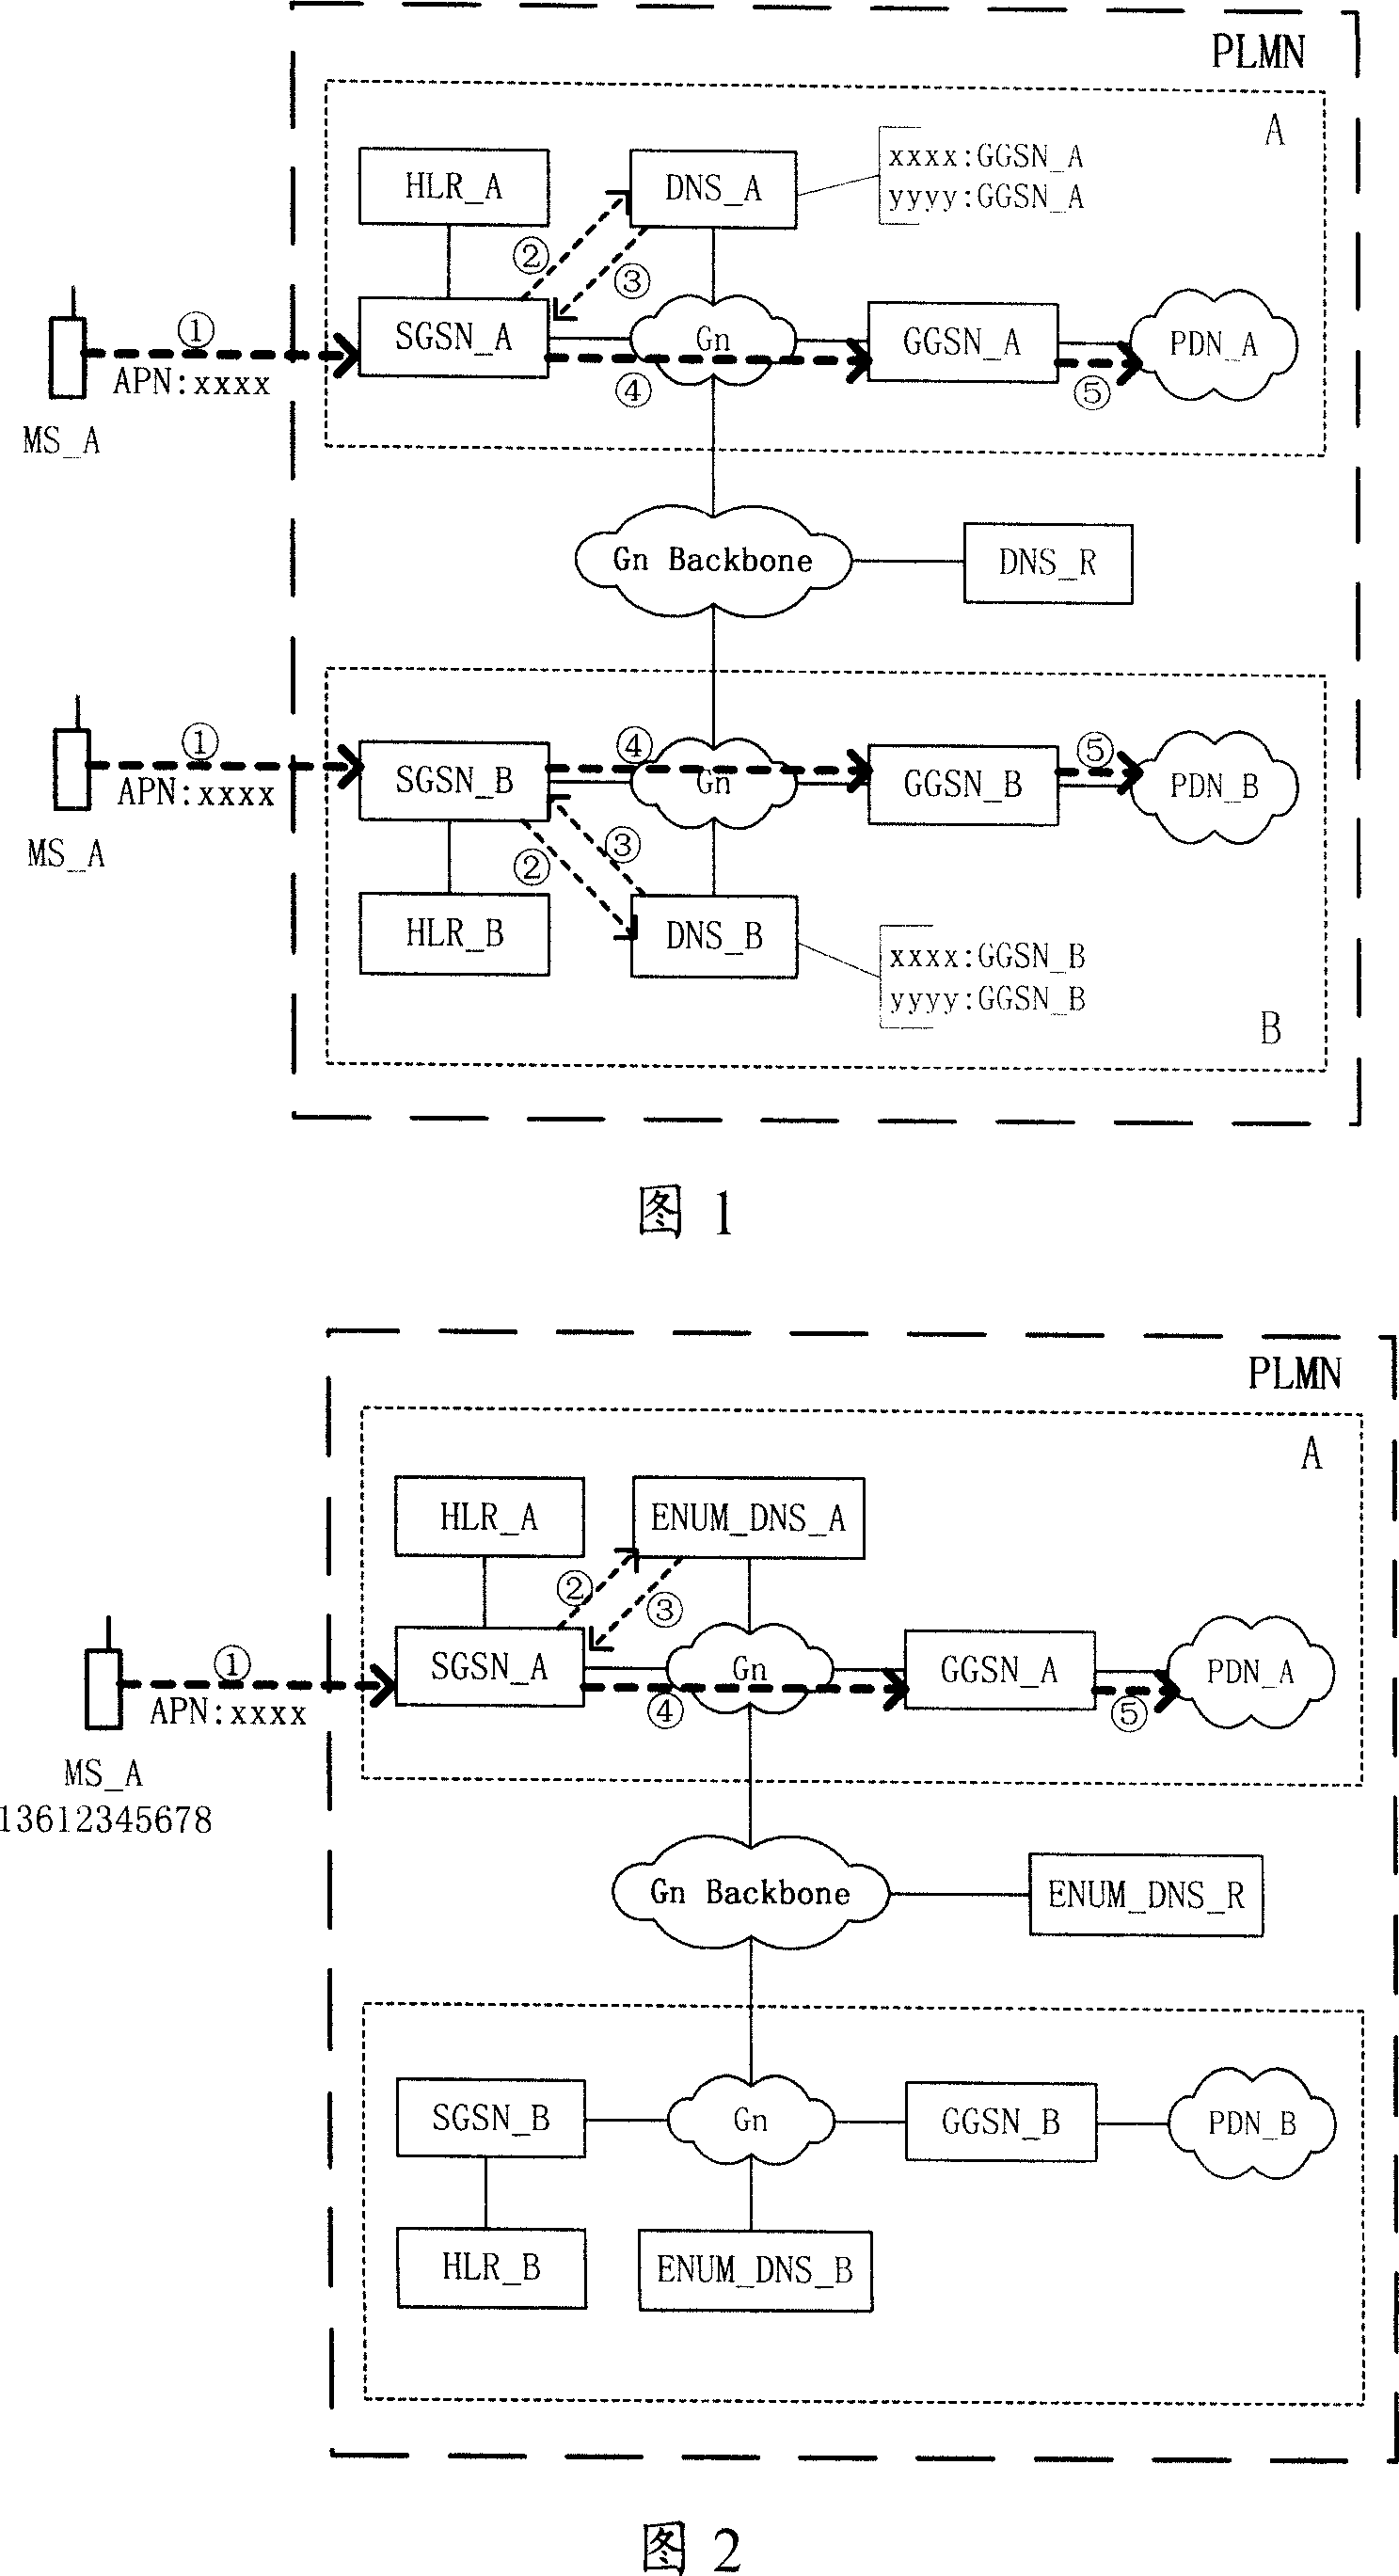 The method and system for access to the home packet data network